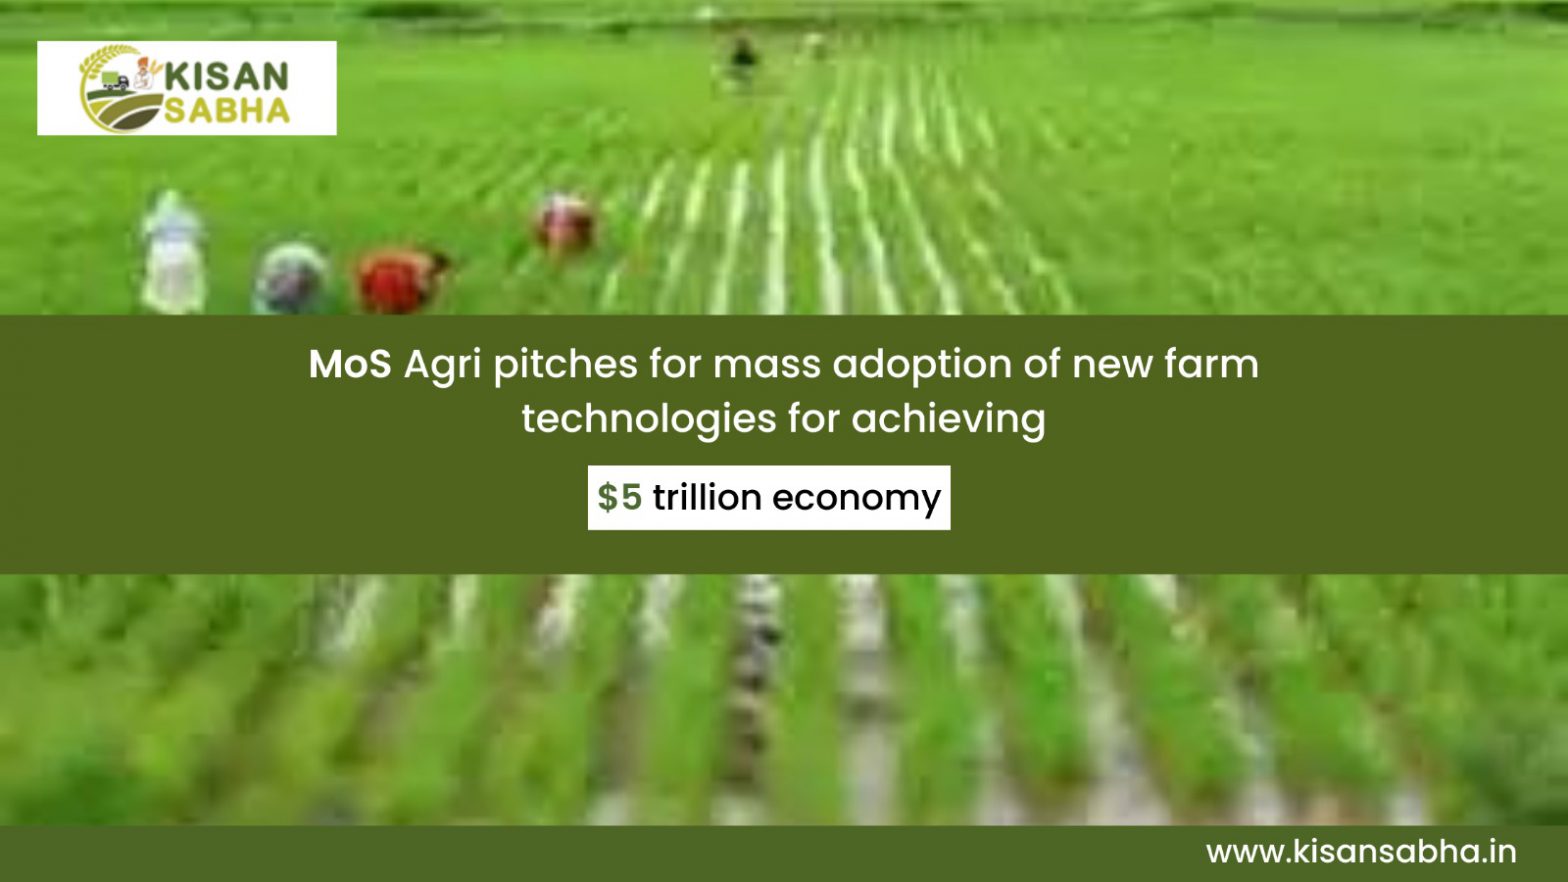 MoS Agri pitches for mass adoption of new farm technologies for achieving $5 trillion economy